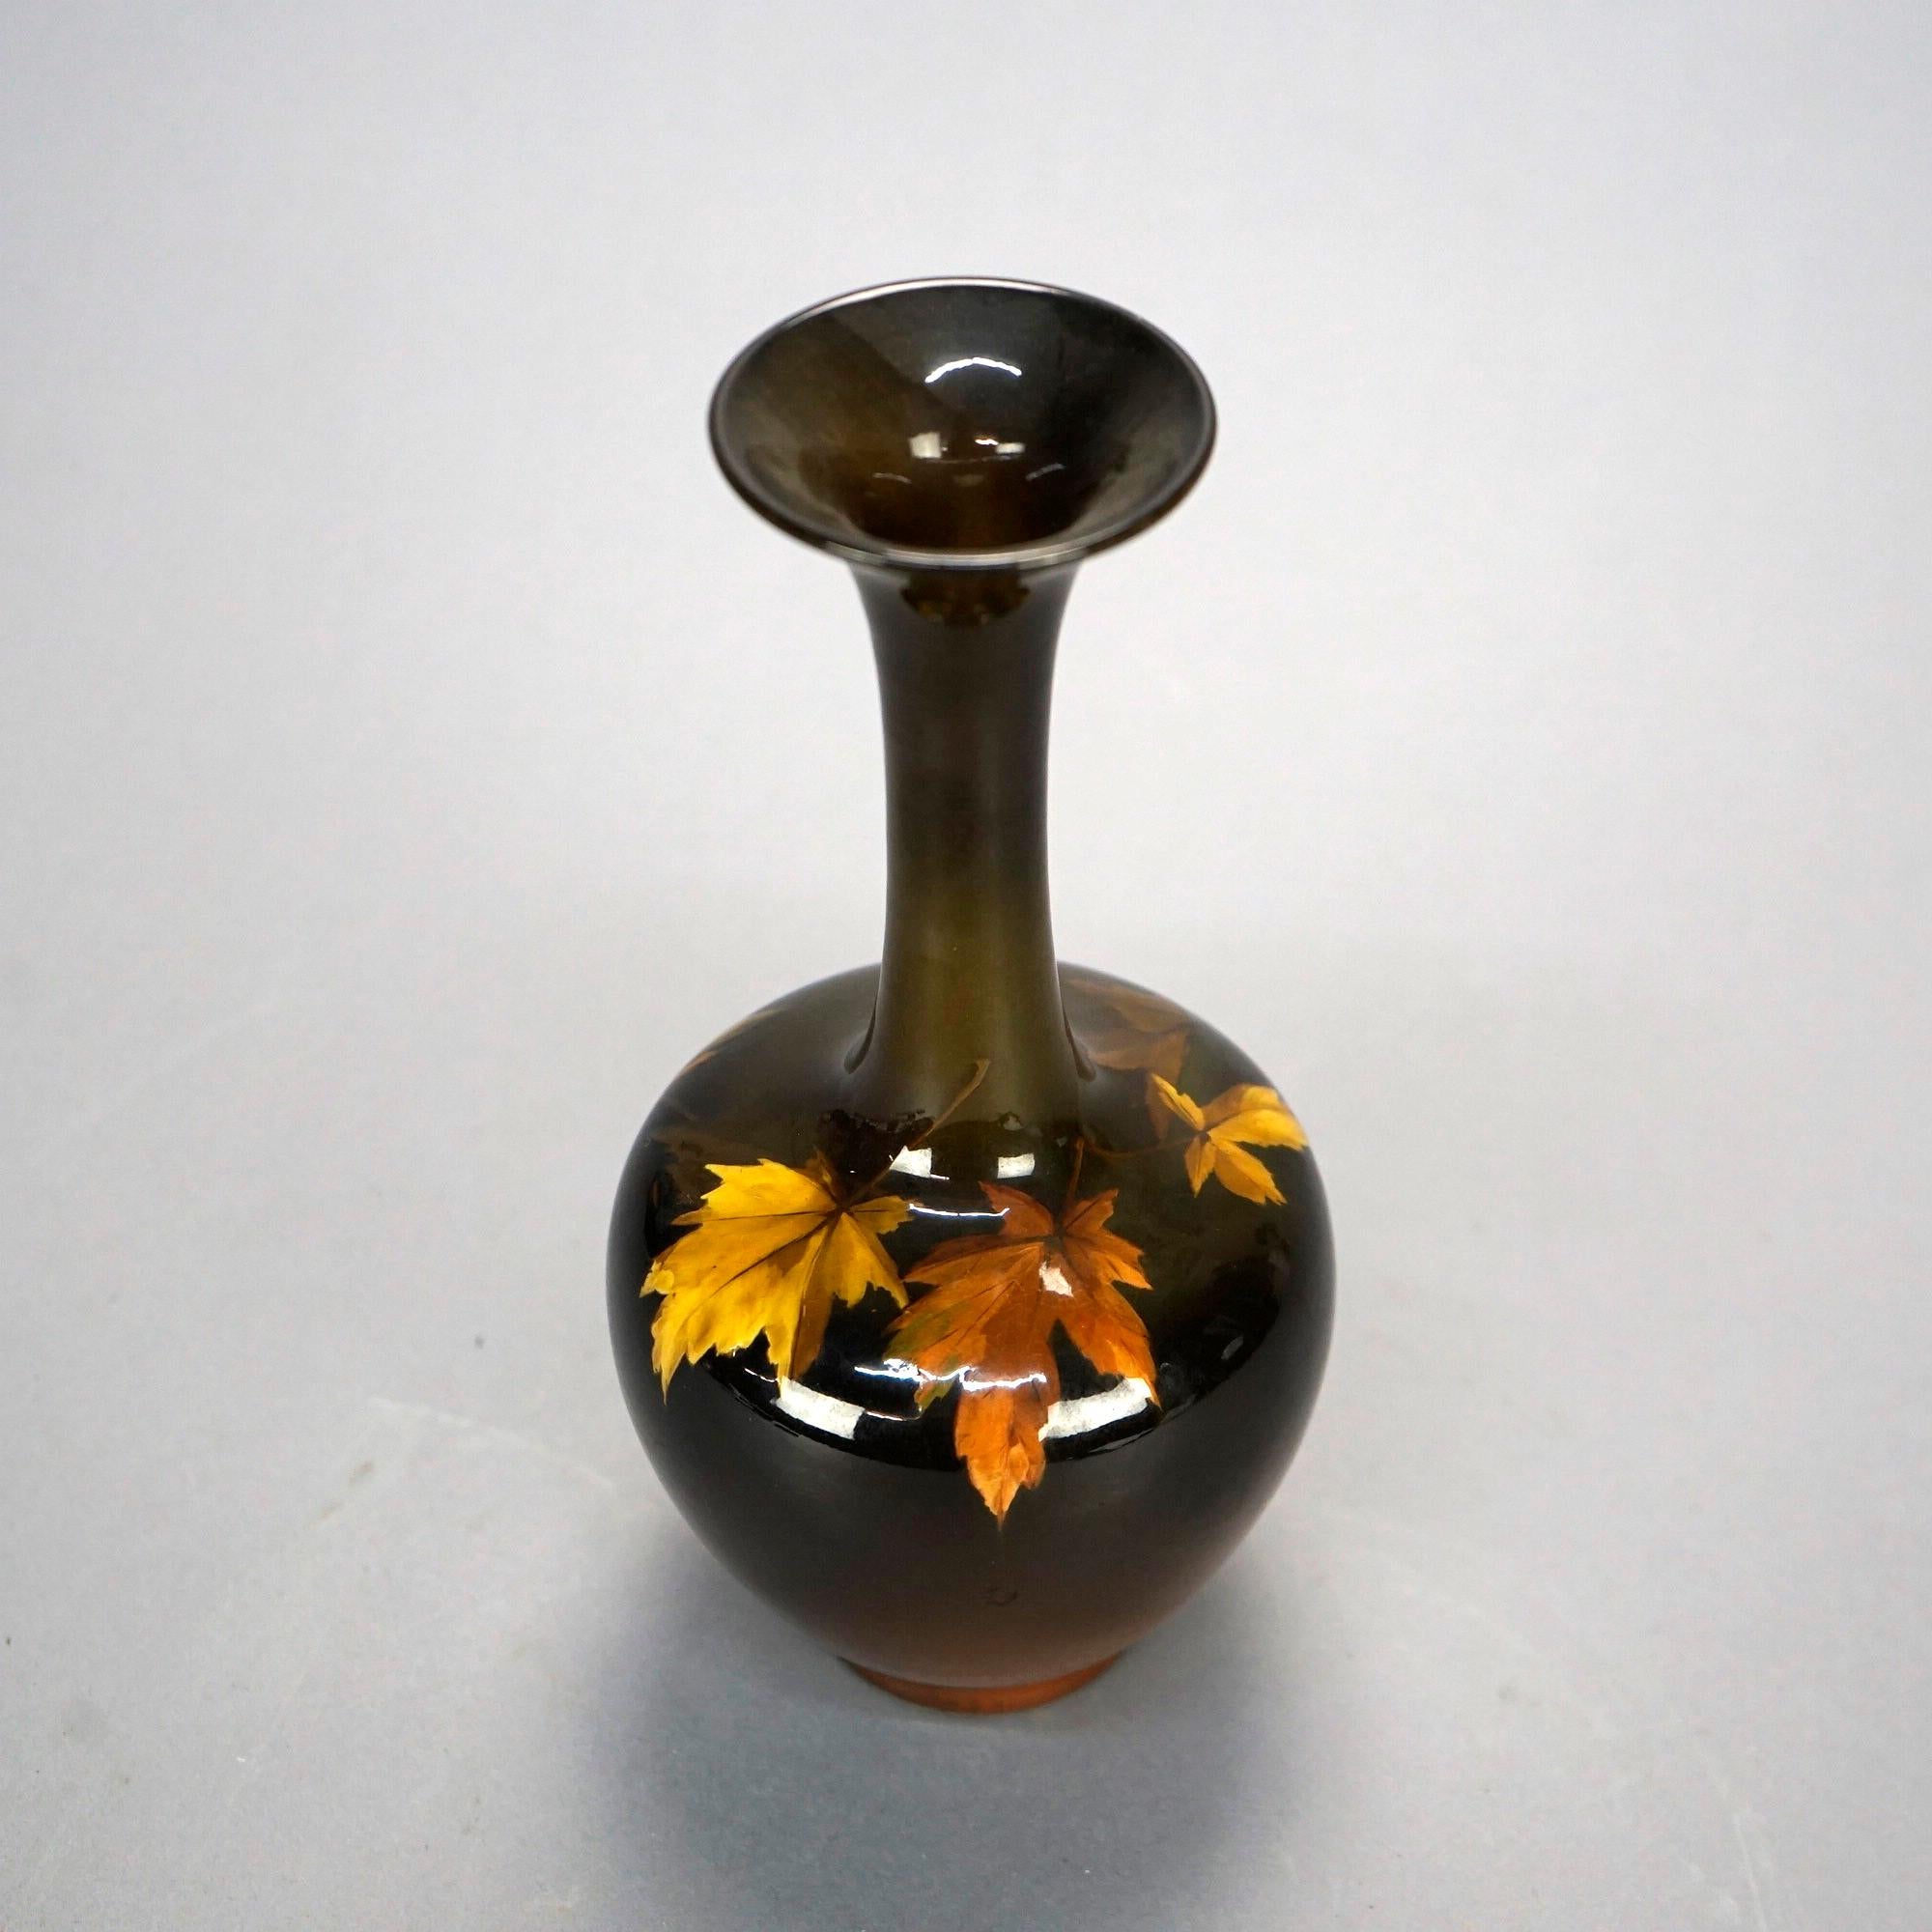 An antique Arts and Crafts vase by Rookwood offers art pottery construction in bulbous form with extended neck termination in flared mouth, hand painted collar of fall maple leaves, maker mark on base as photographed, c1930

Measures- 9''H x 4.25''W